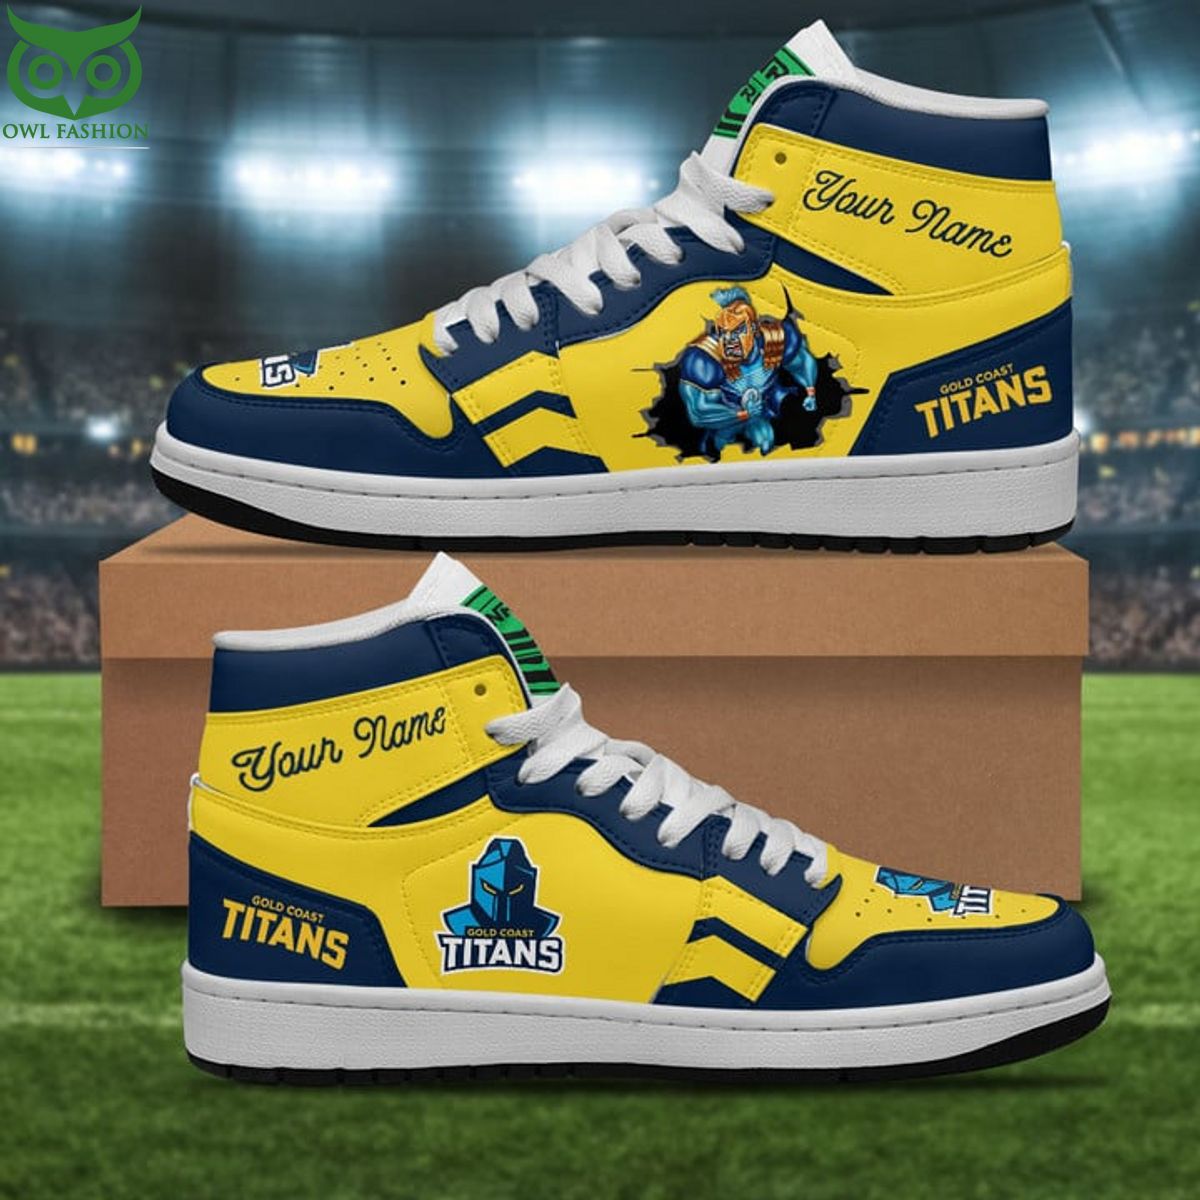 personalized nrl gold coast titans air jordan 1 sneakers limited 1 1RbxZ.jpg